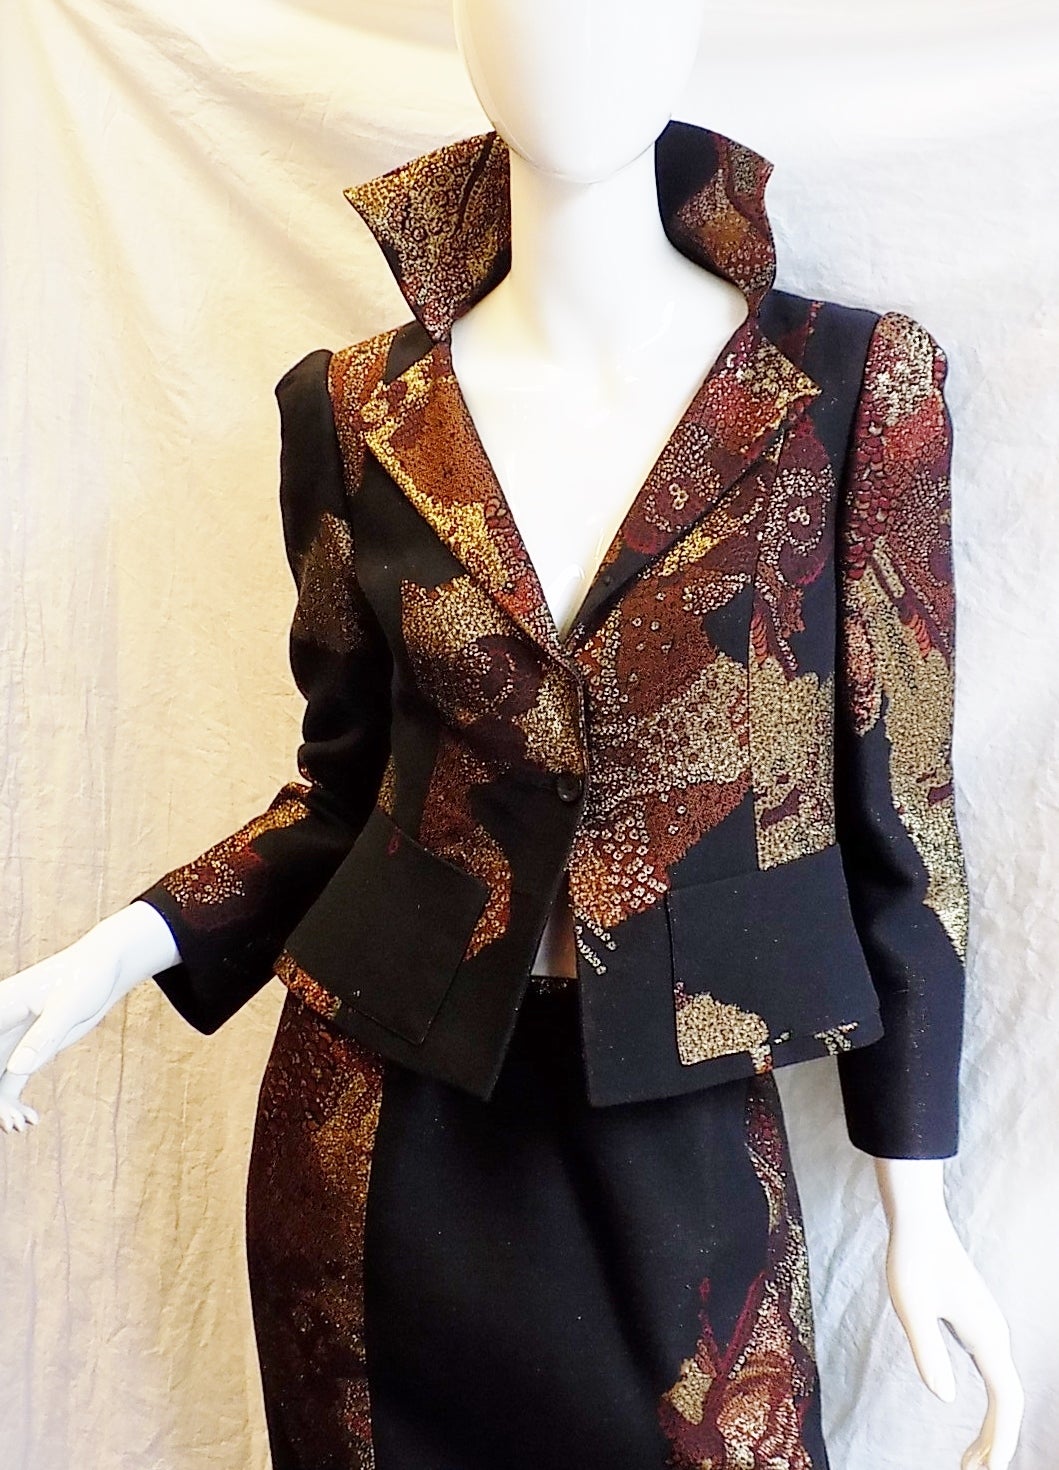 When working with amazing fabric you make amazing clothing! Cotton and wool blend  gold metallic base with black and sporadic print  made this incredible skirt suit. Blend of  tones of copper , gold and black in exact  places and amount. Great cut